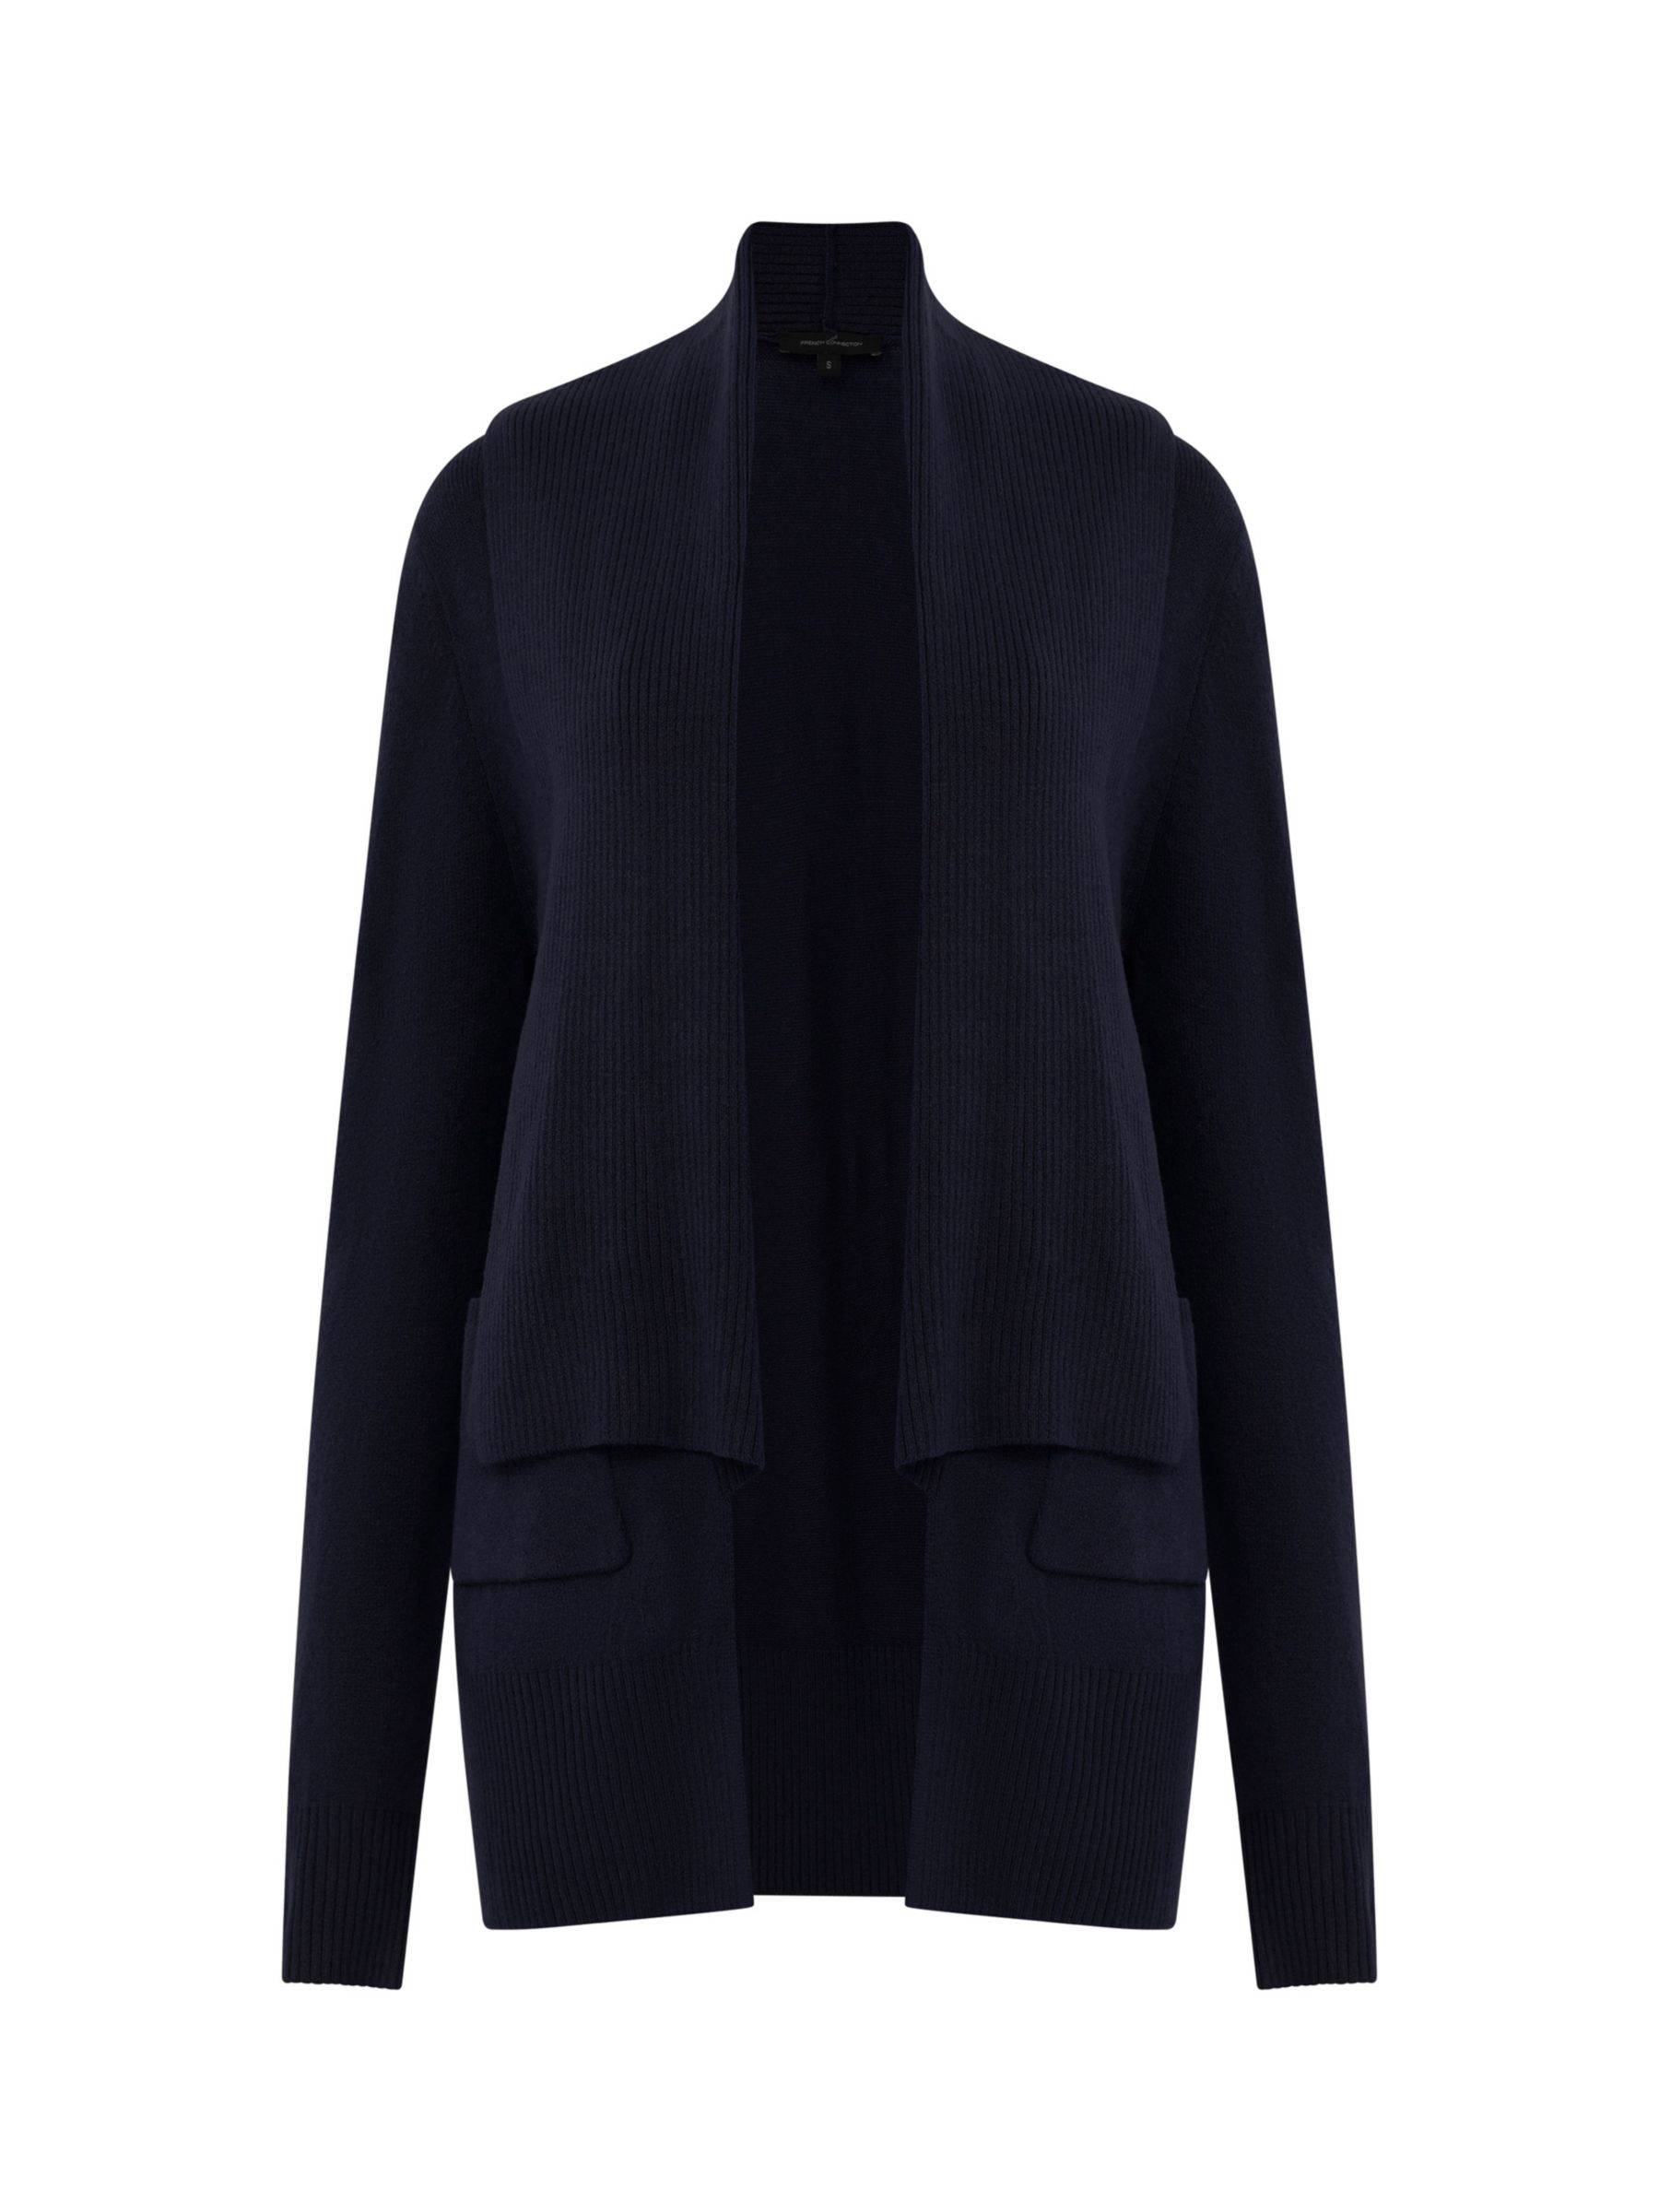 French Connection Waterfall Cardigan, Navy at John Lewis & Partners